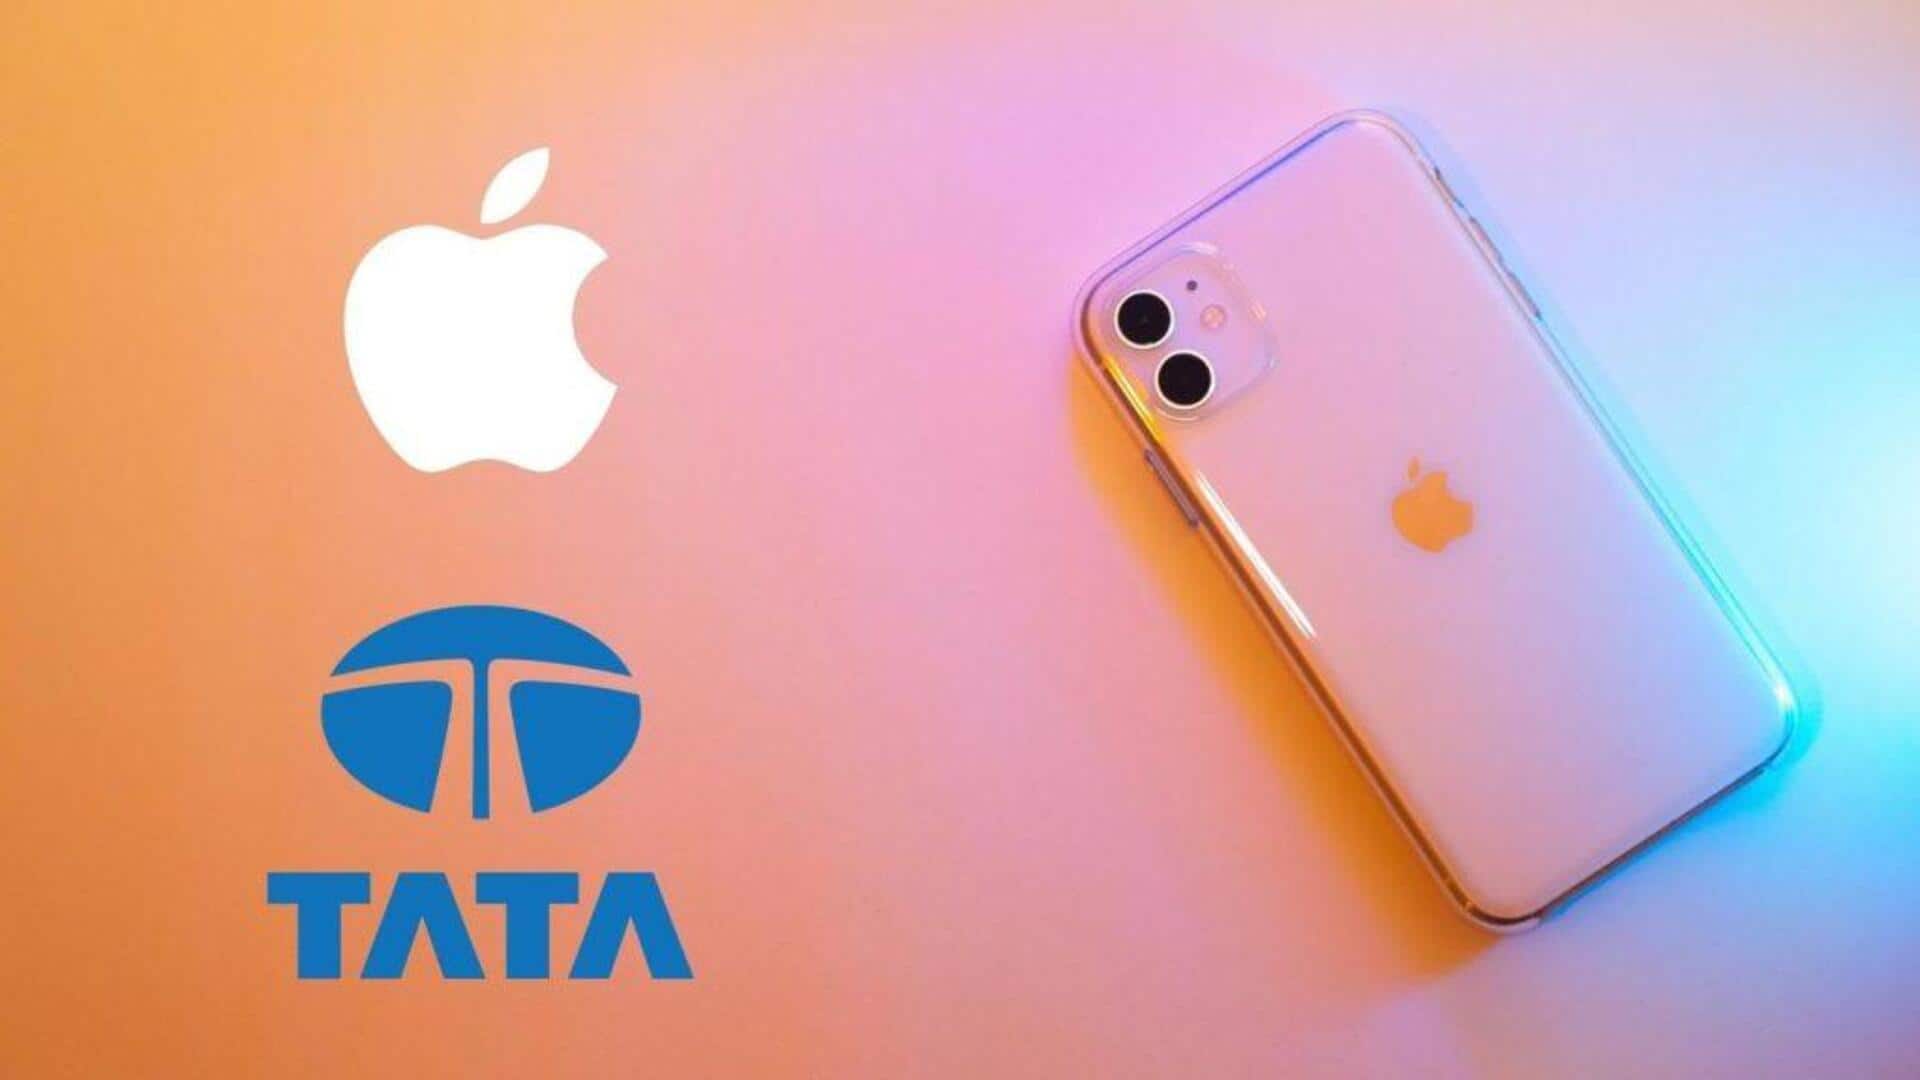 Tata to build new iPhone factory, accelerating Apple's local production